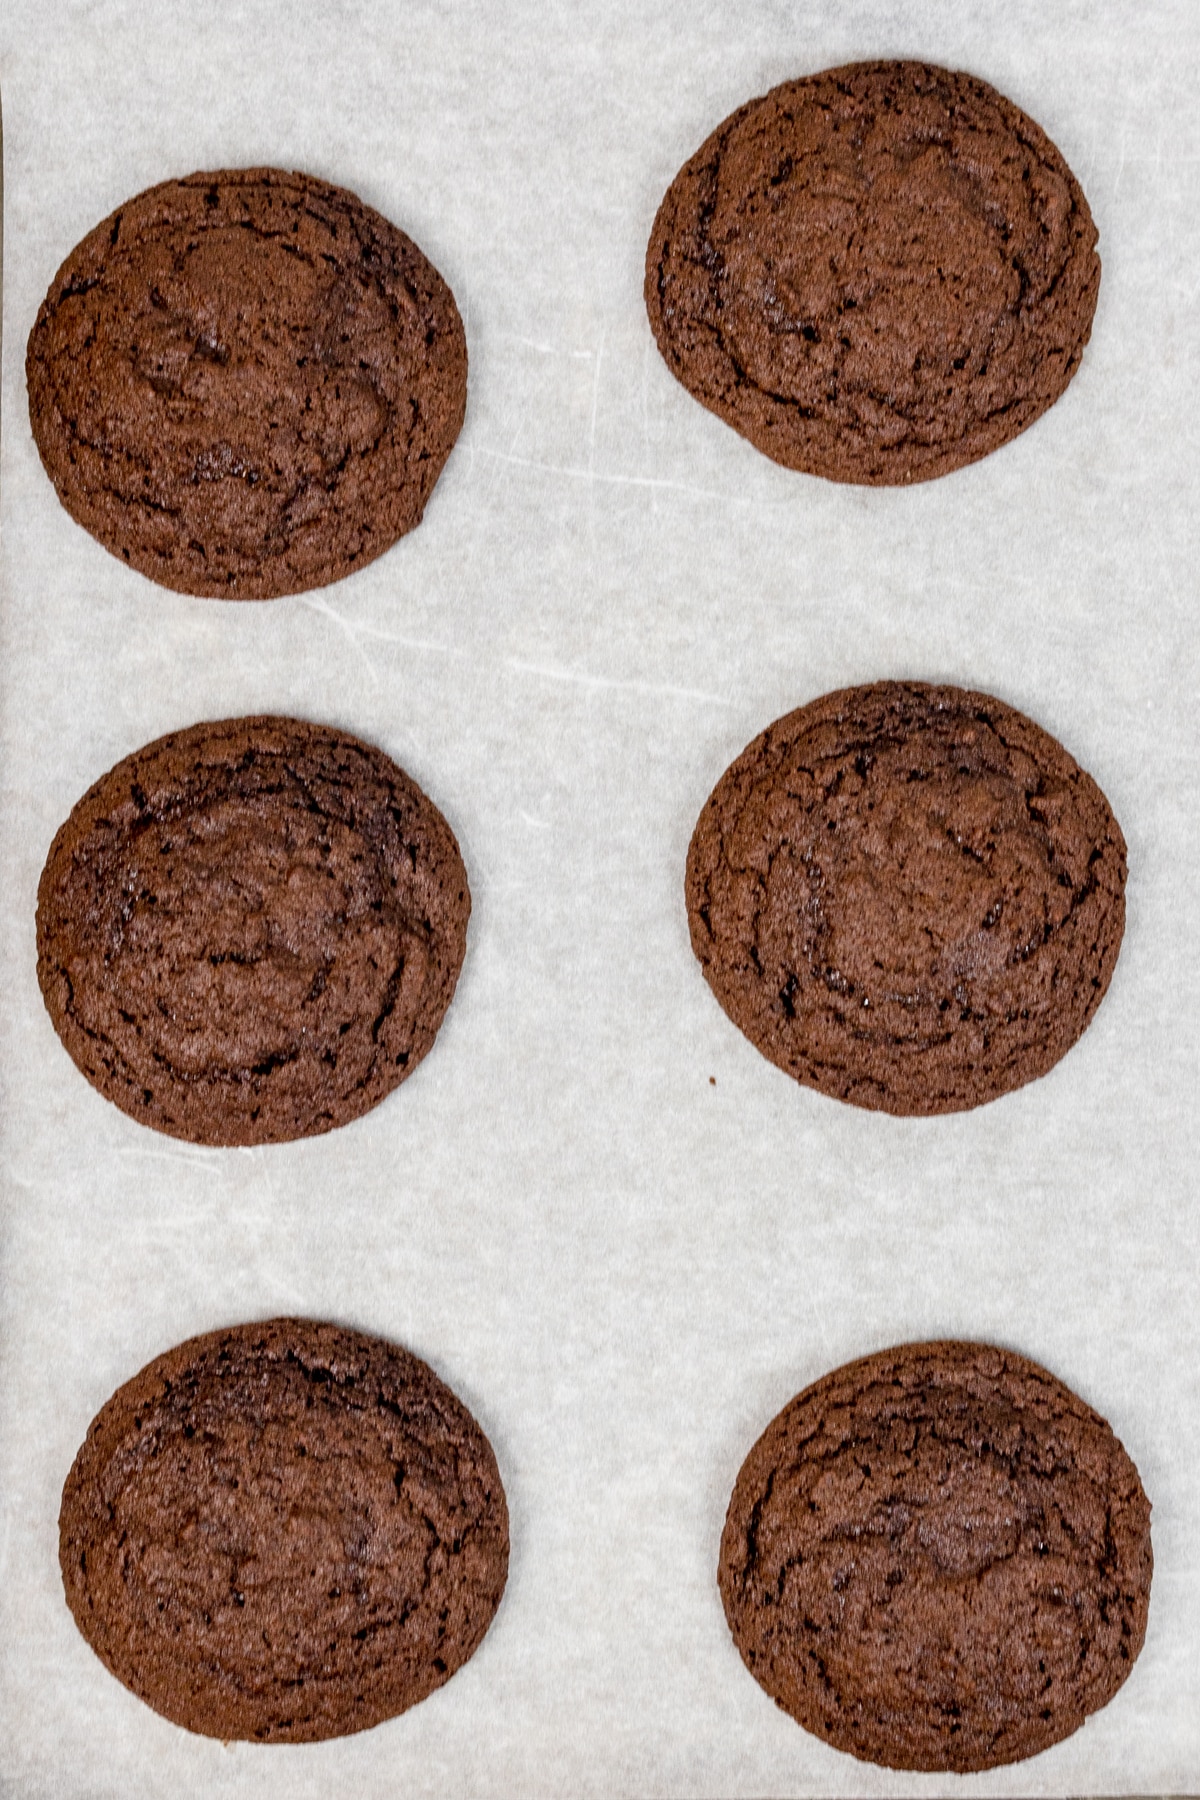 Top view of freshly baked chocolate mint cookies on a parchment paper lined baking tray. 